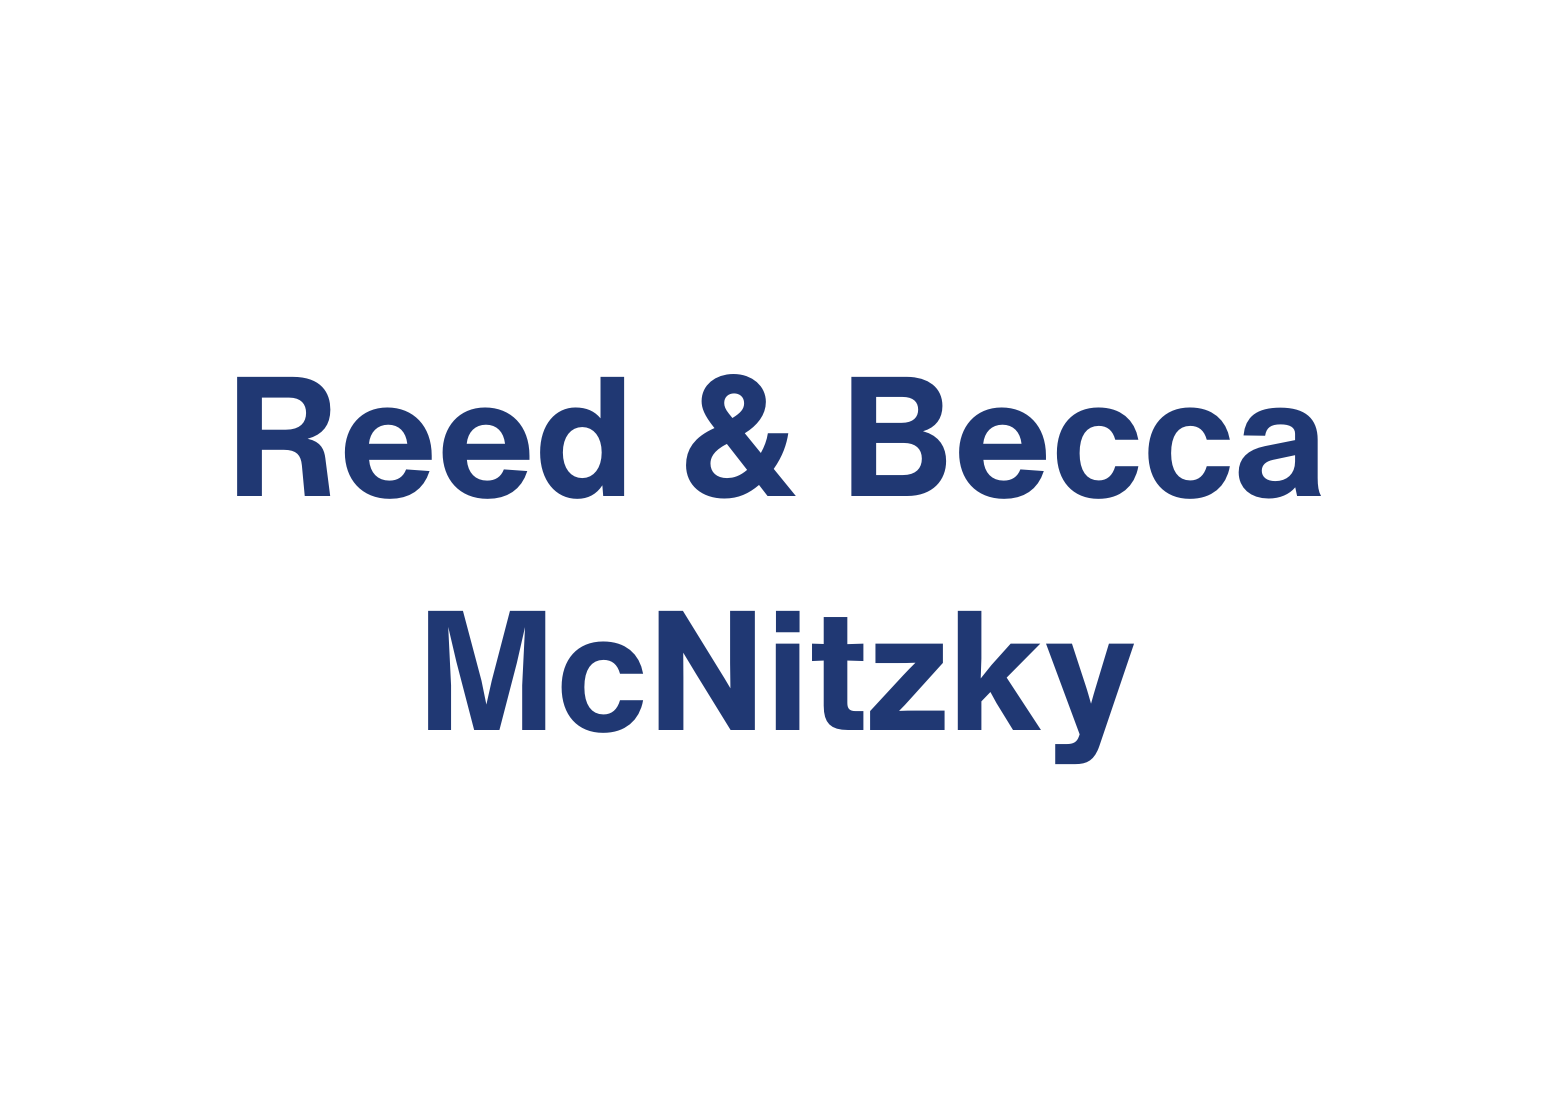 Rev. Reed & Becca McNitzky